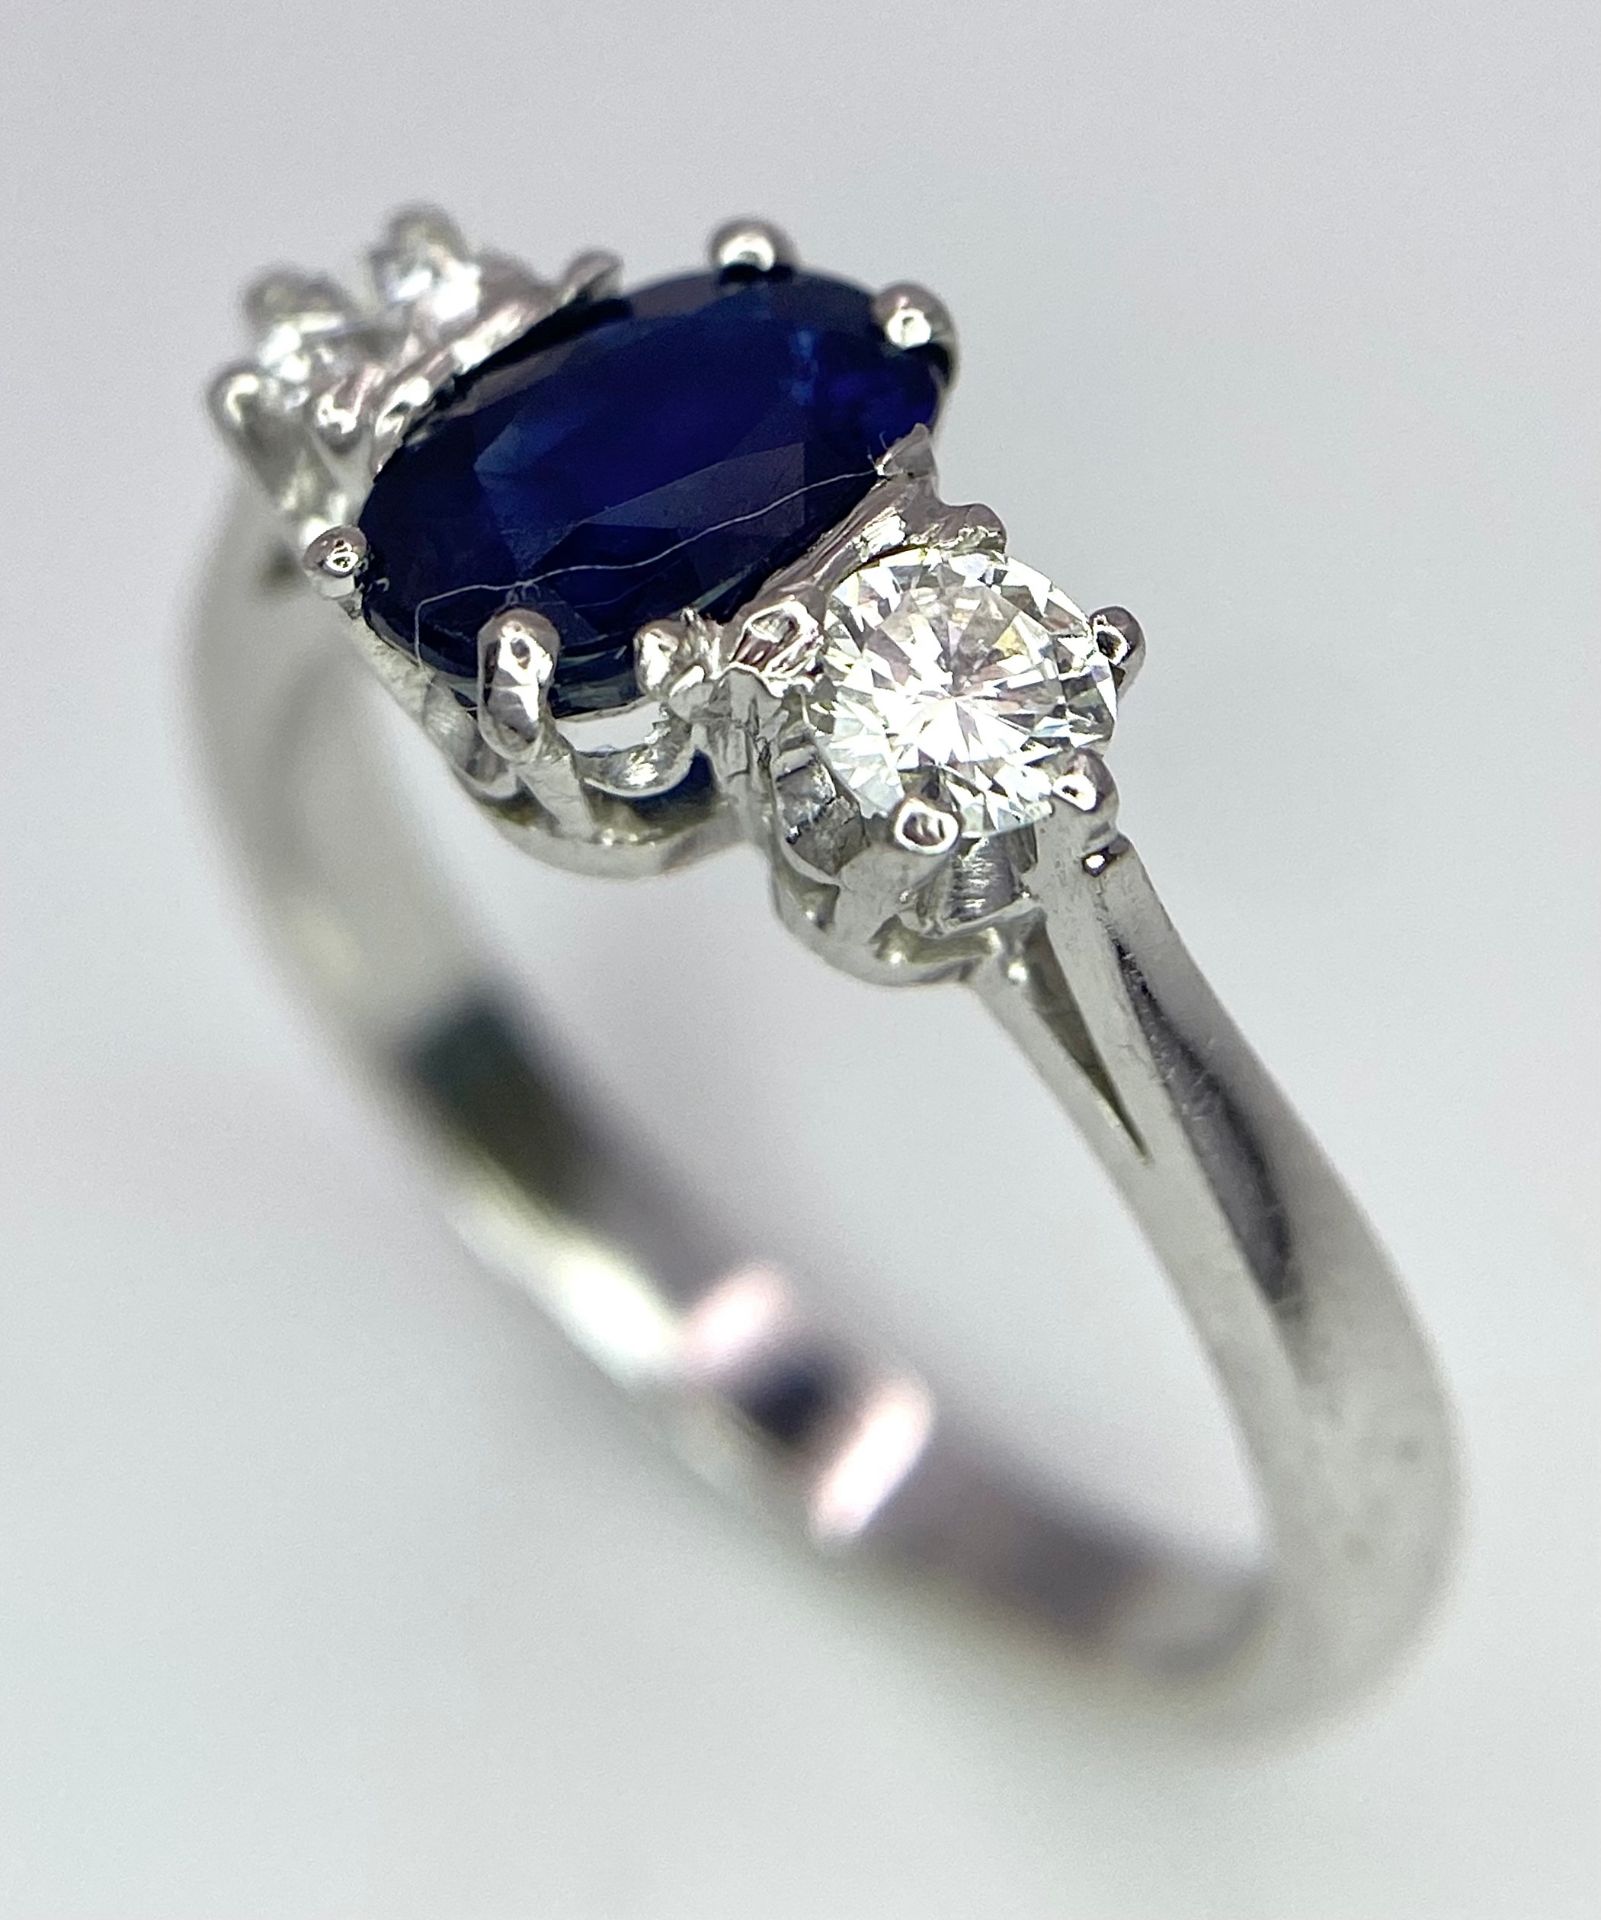 AN 18K WHITE GOLD, DIAMOND AND SAPPHIRE 3 STONE RING. OVAL BLUE SAPPHIRE - 0.75CT AND 0.30CT OF - Image 2 of 6